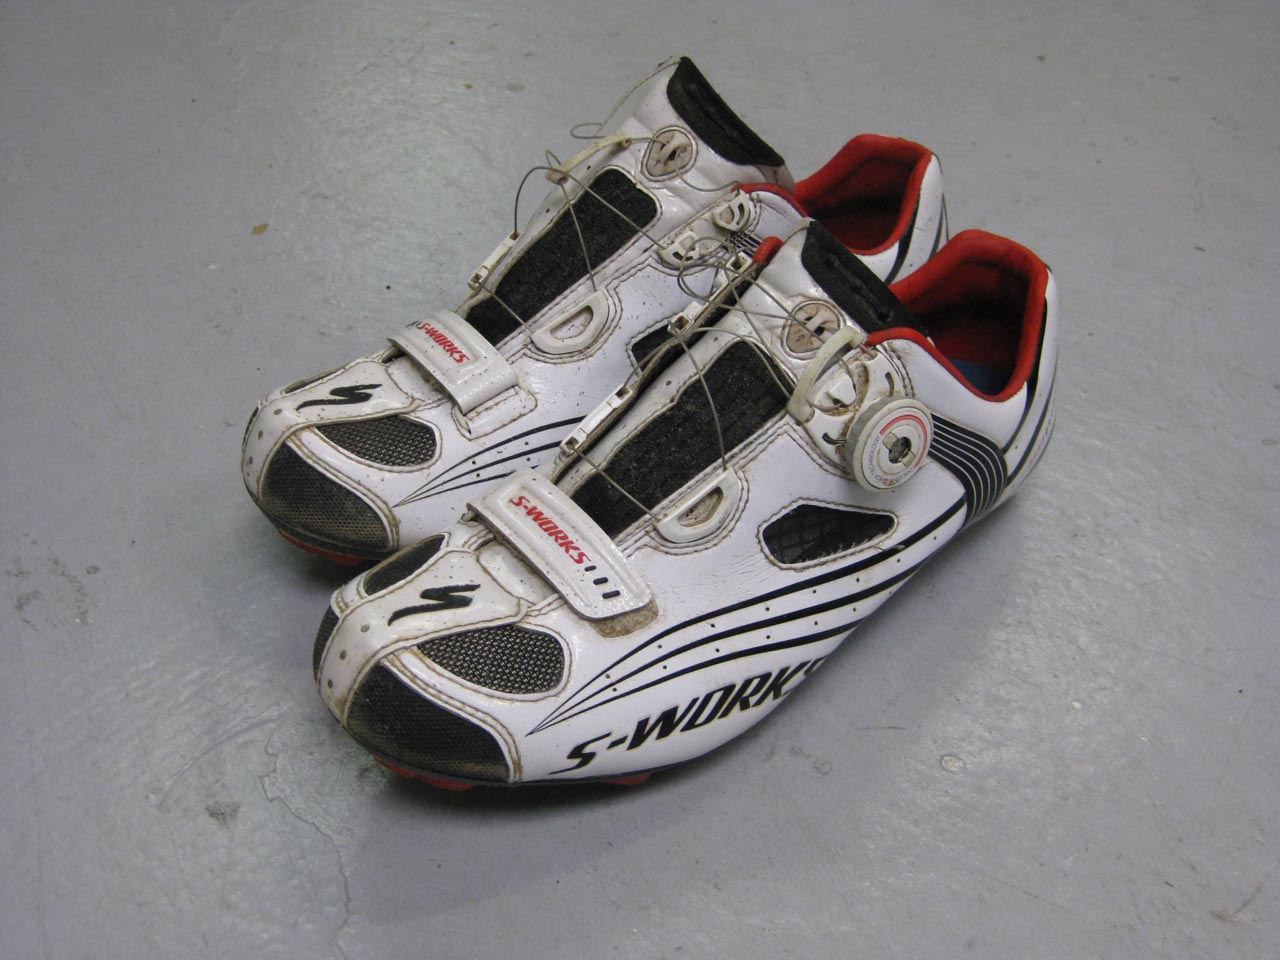 s works cycling shoes